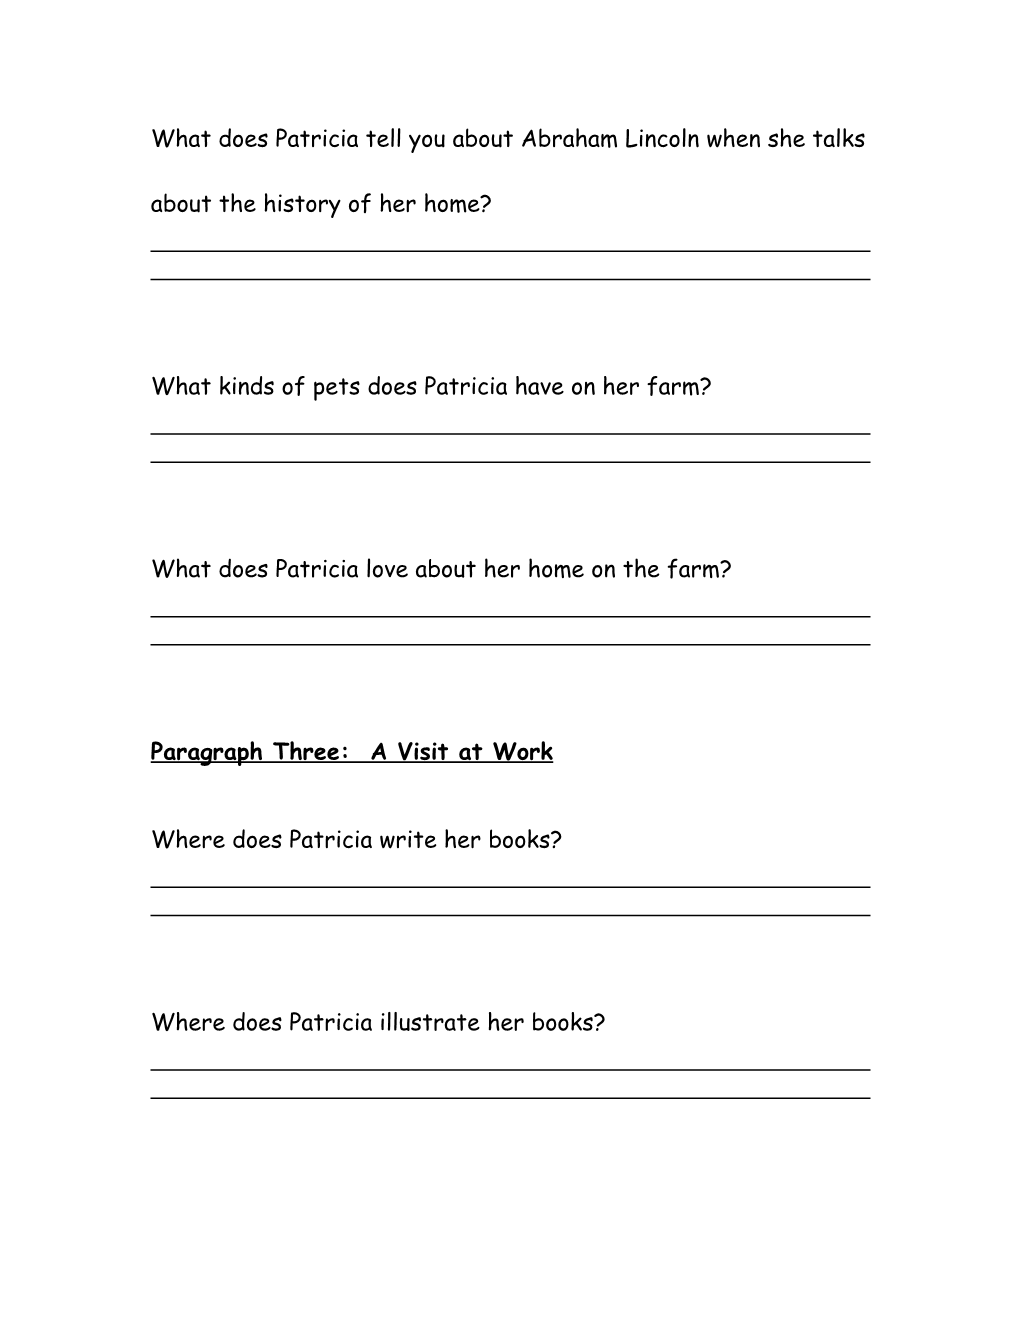 Author Study Research Packet